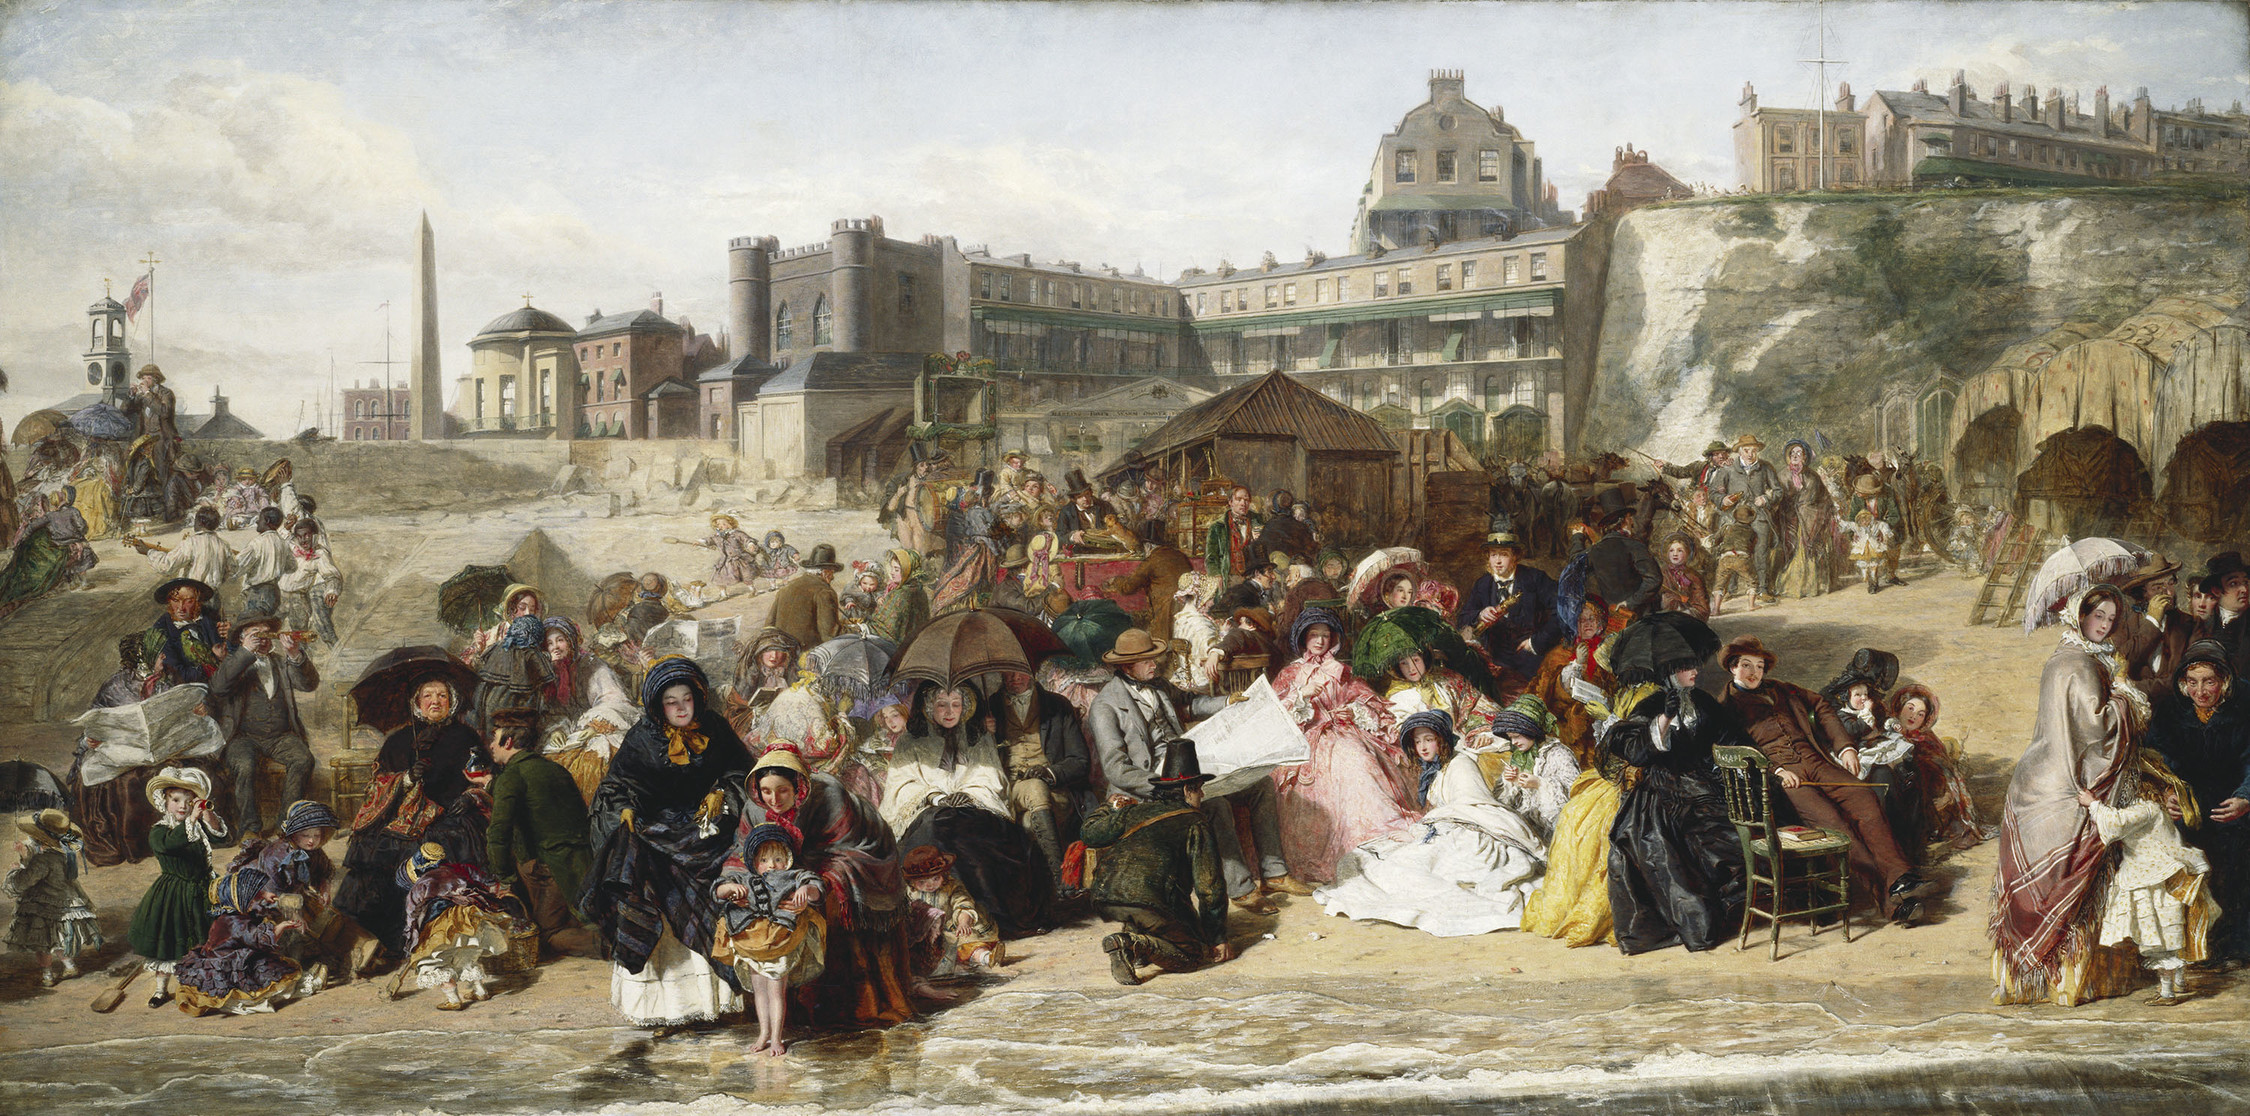 William Powell Frith, Ramsgate Sands (Life at the Seaside), 1851-54 , oil on canvas, | 77.0 x 155.1 cm (Royal Collection Trust)